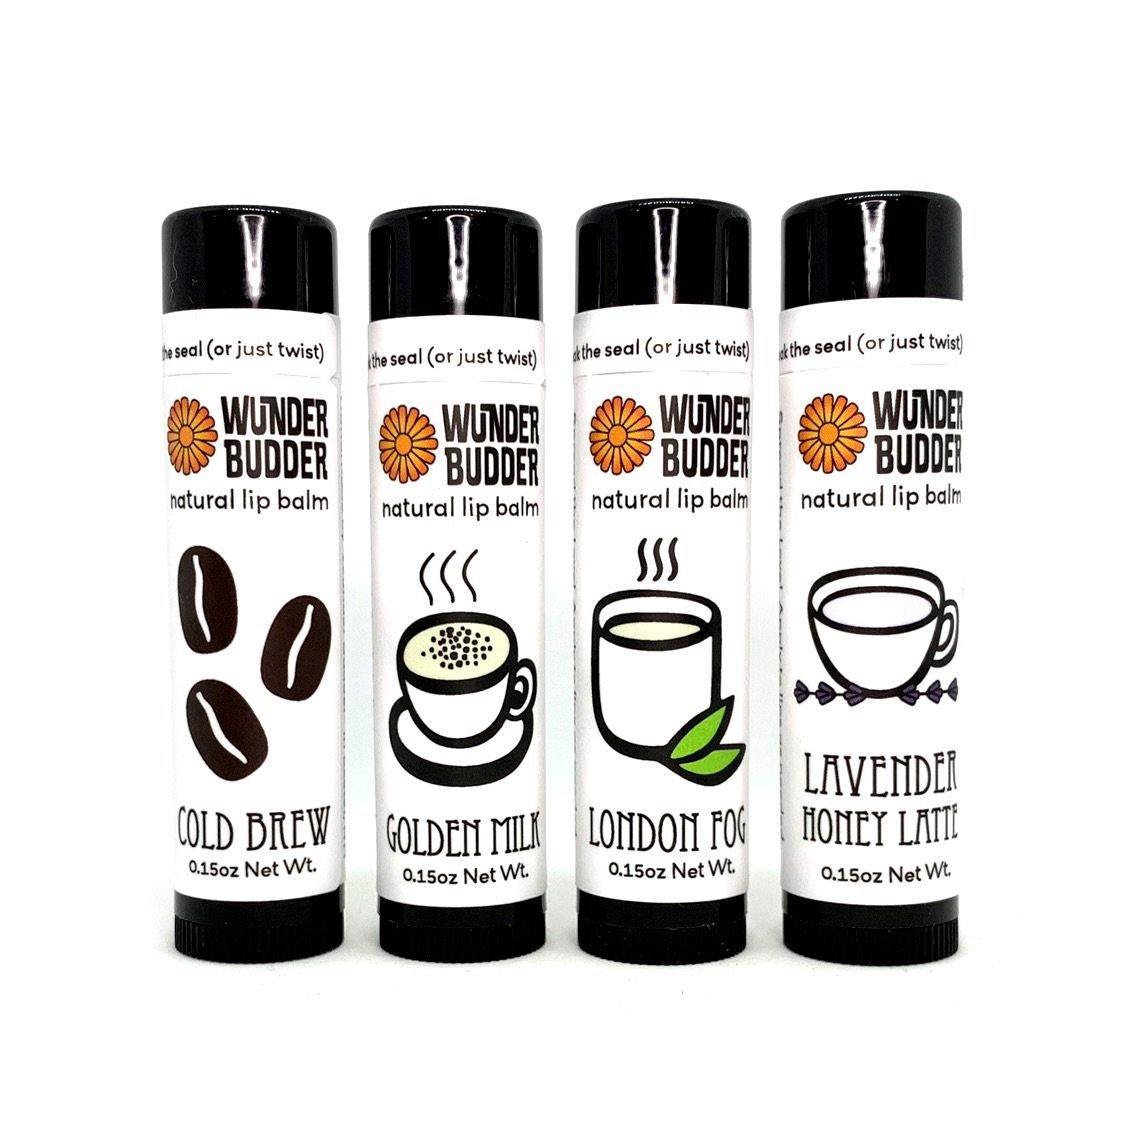 Cafe Collection Natural Lip Balm - Limited! Lip Balm Wunder Budder All Four 